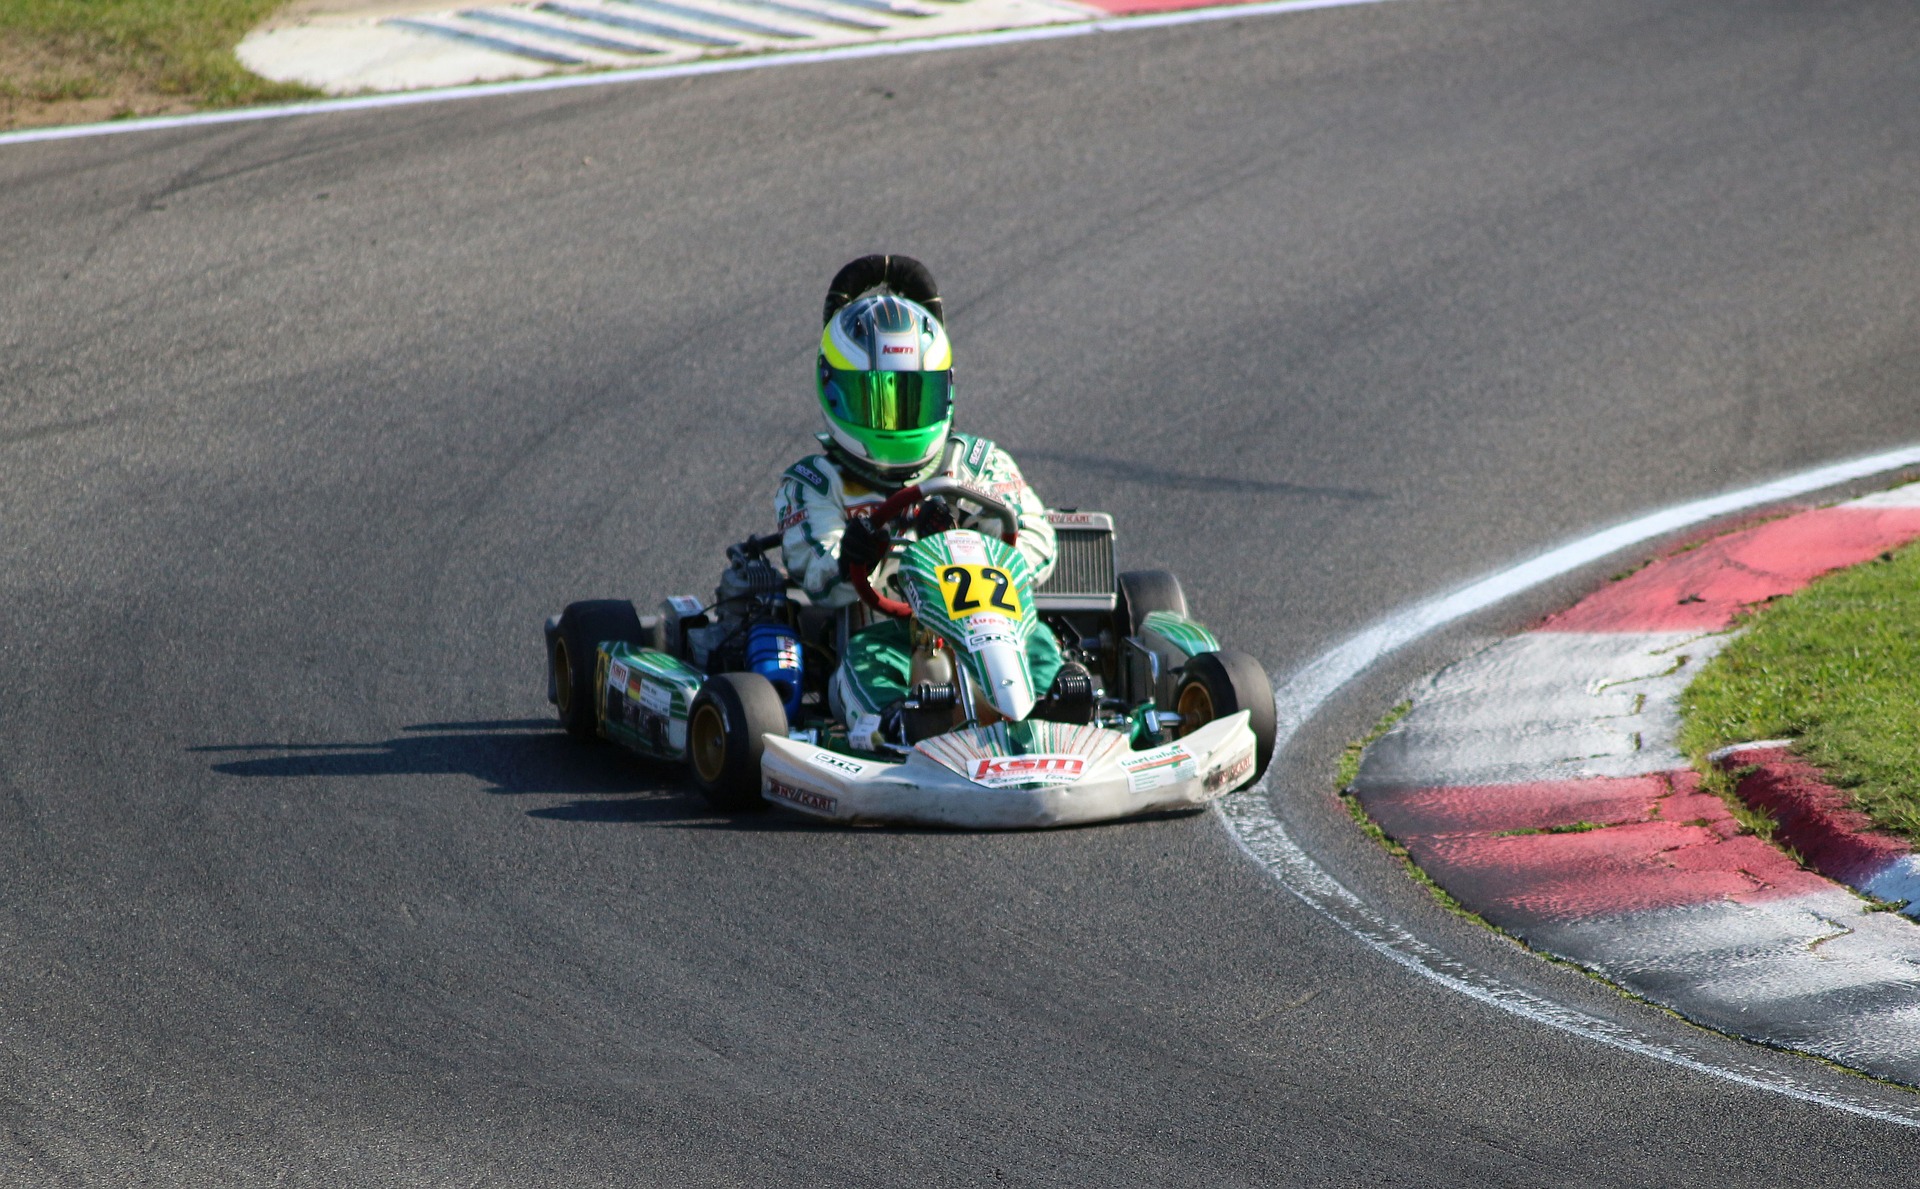 Man riding a go kart for the Motorsport race